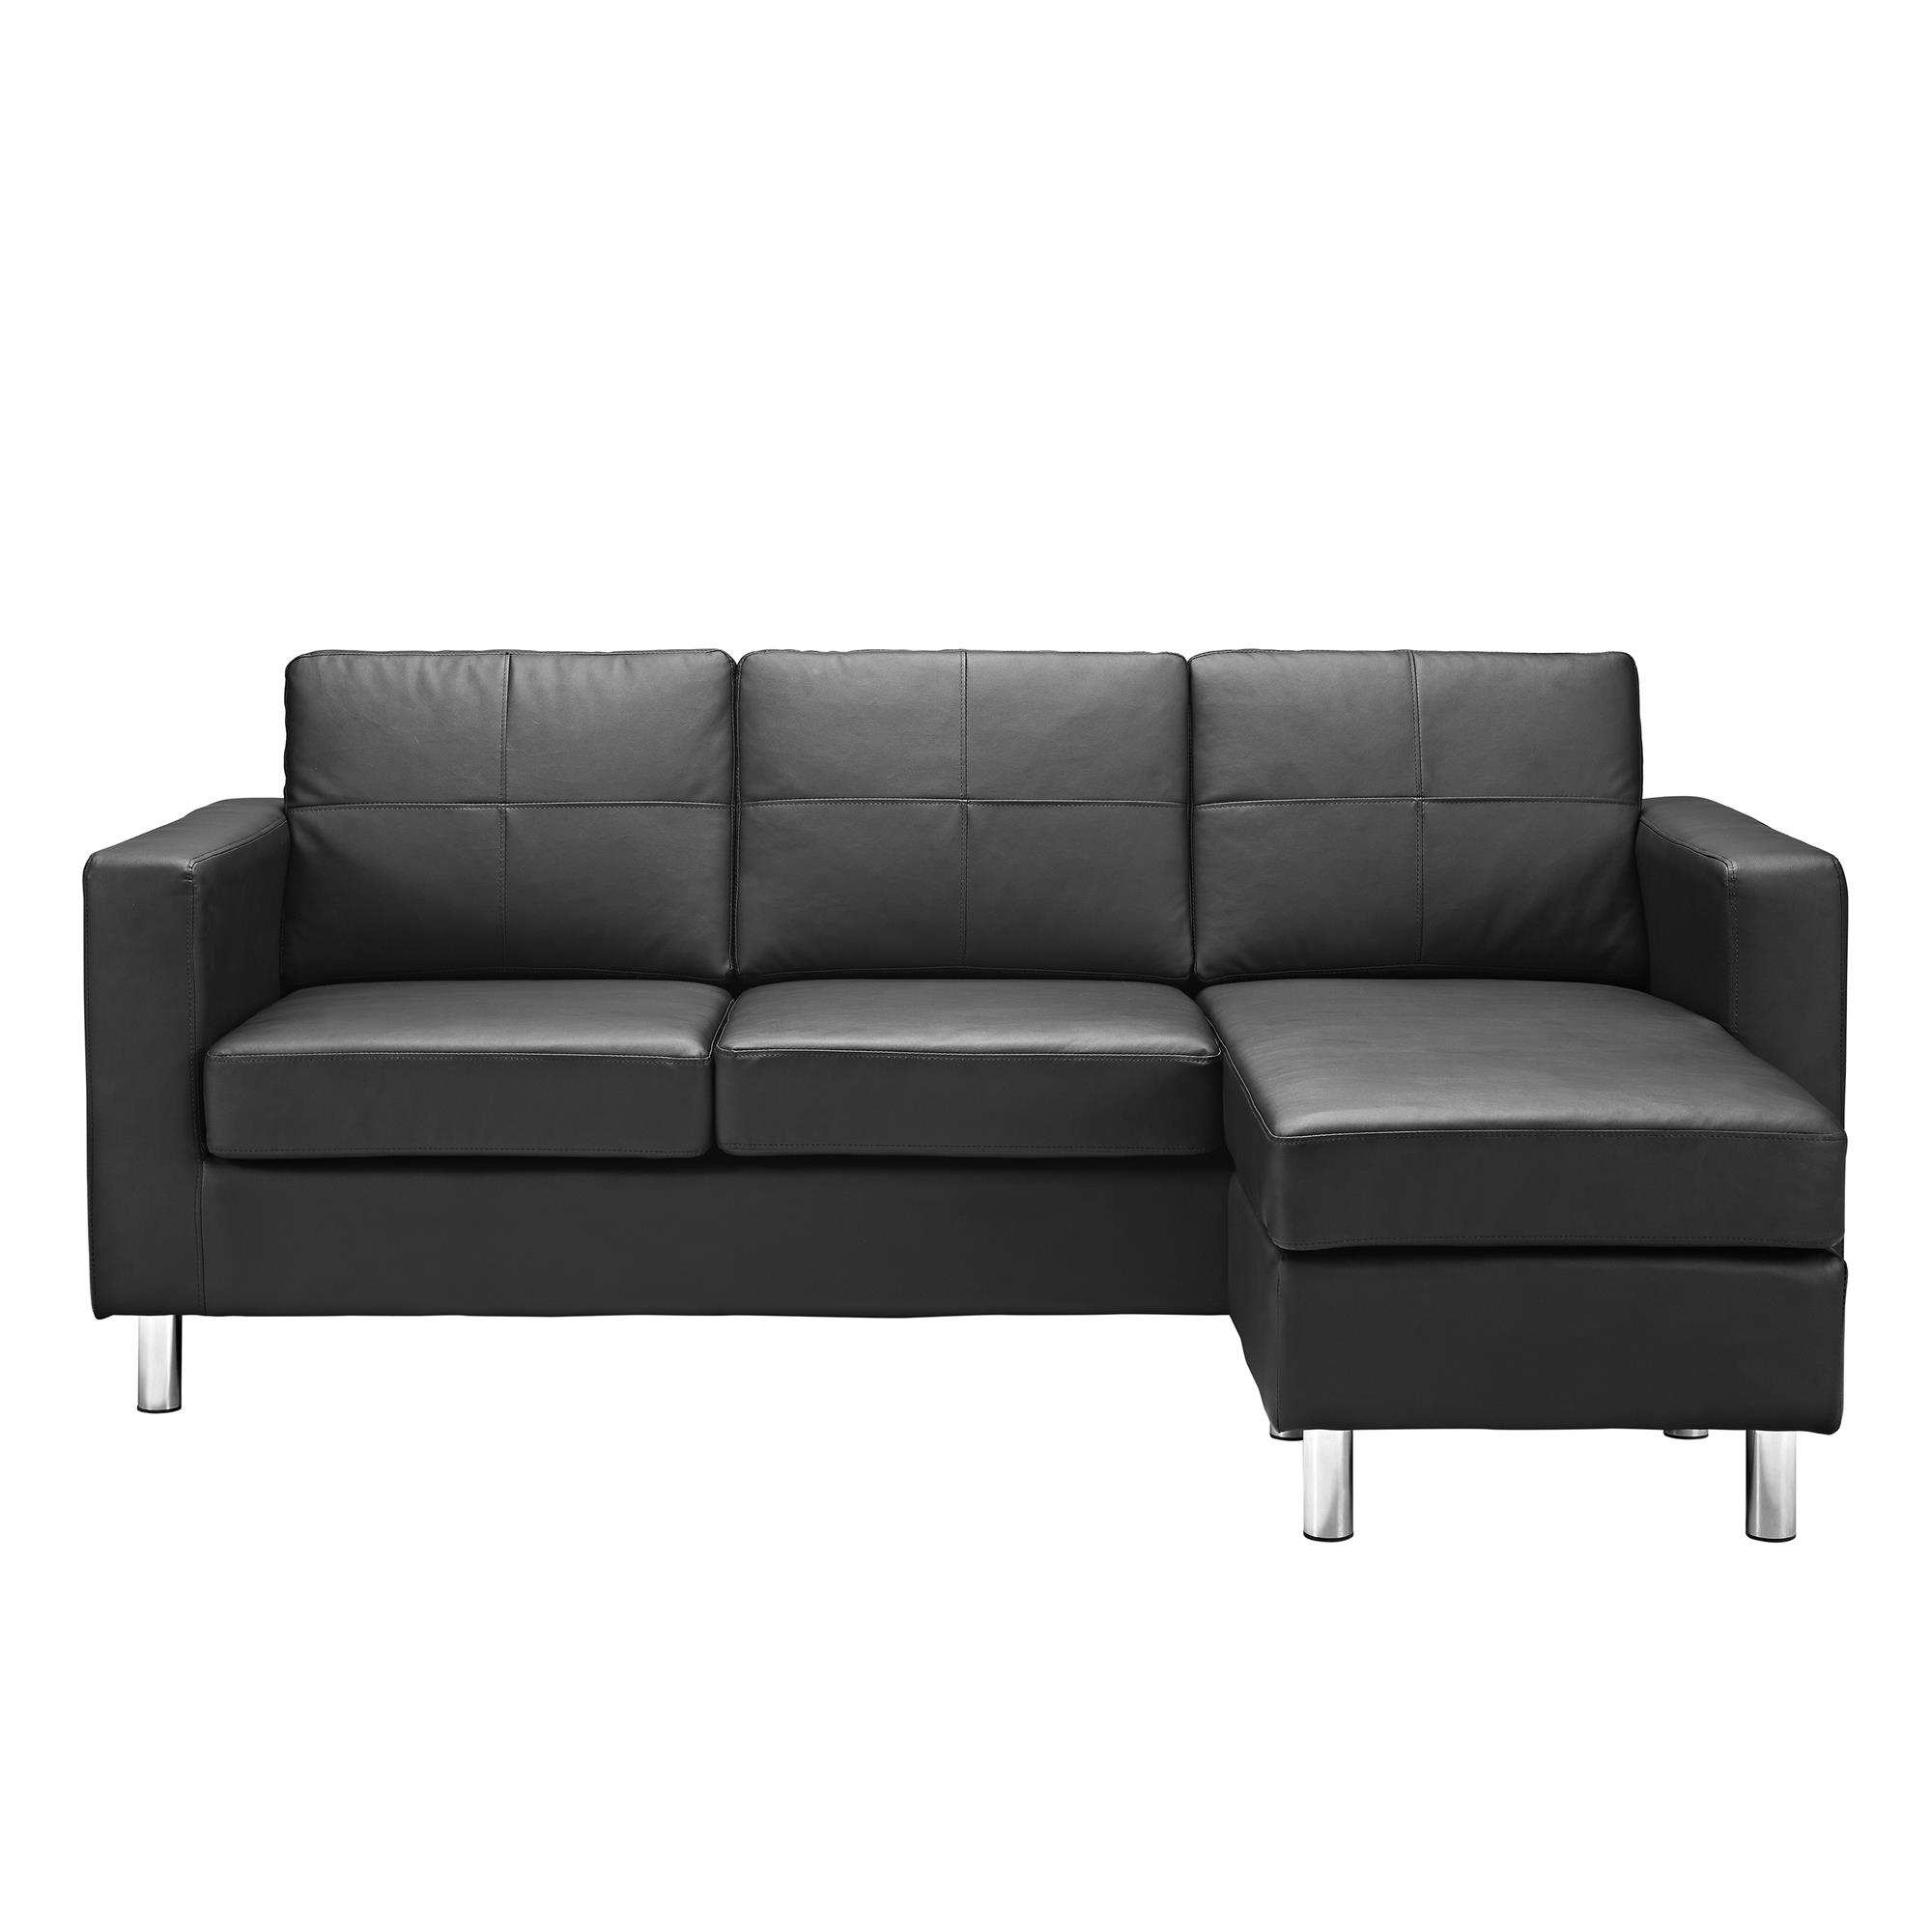 DHP Small Spaces Configurable Sectional Sofa, Multiple Colors - Black - image 5 of 6